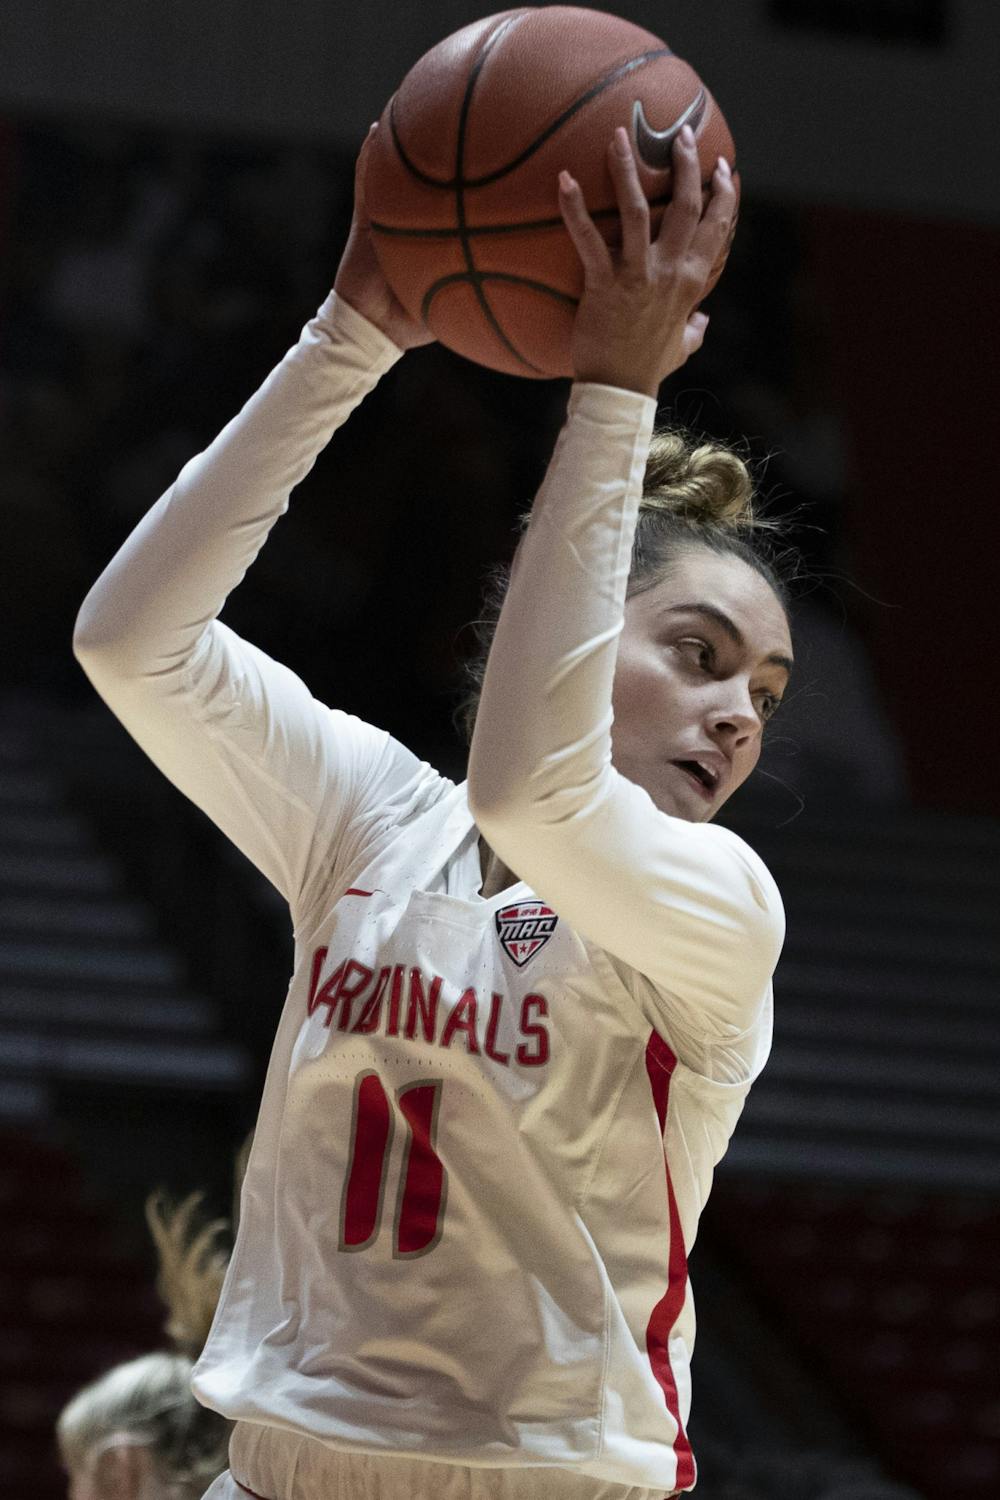 Cardinals earn 1st conference win behind Freeman's career-high performance